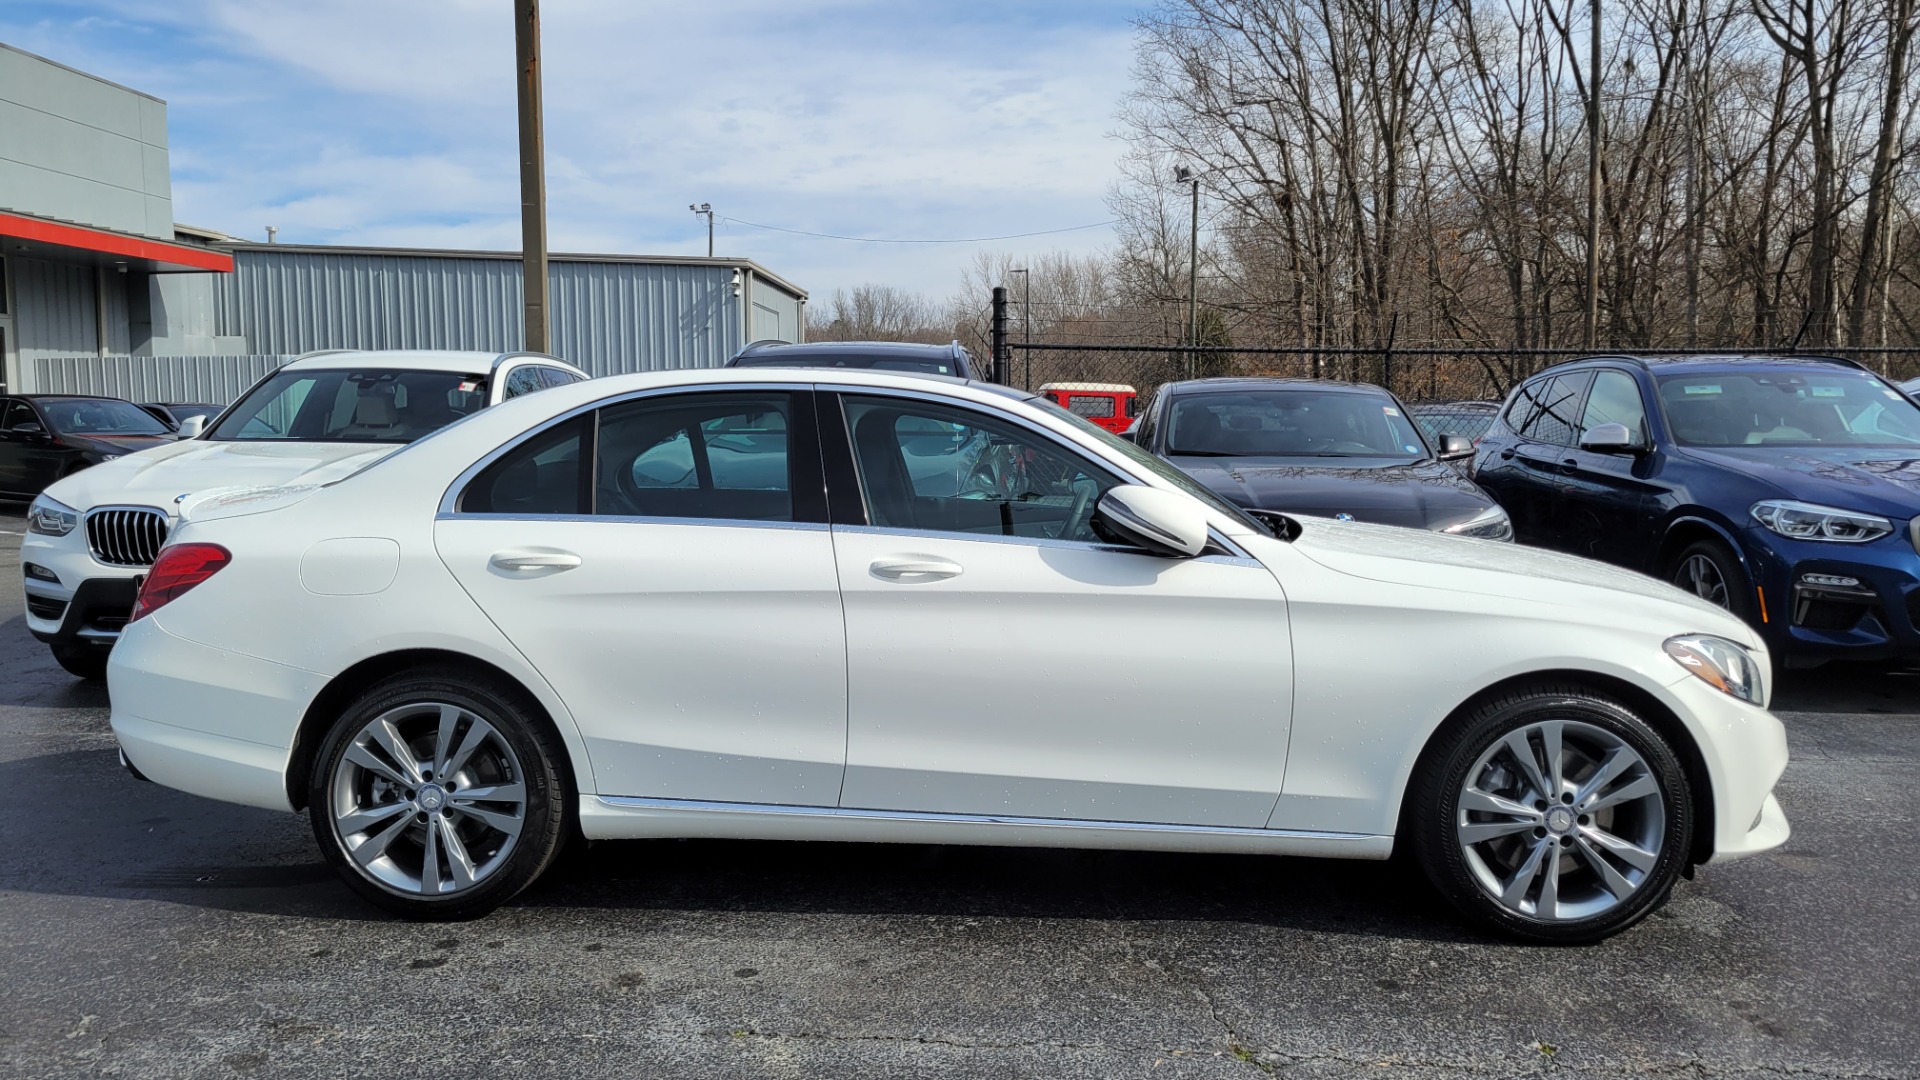 Used 2016 Mercedes-Benz C-CLASS C 300 4MATIC / PANO-ROOF / HTD STS / SIRIUSXM RADIO / REARVIEW for sale Sold at Formula Imports in Charlotte NC 28227 3